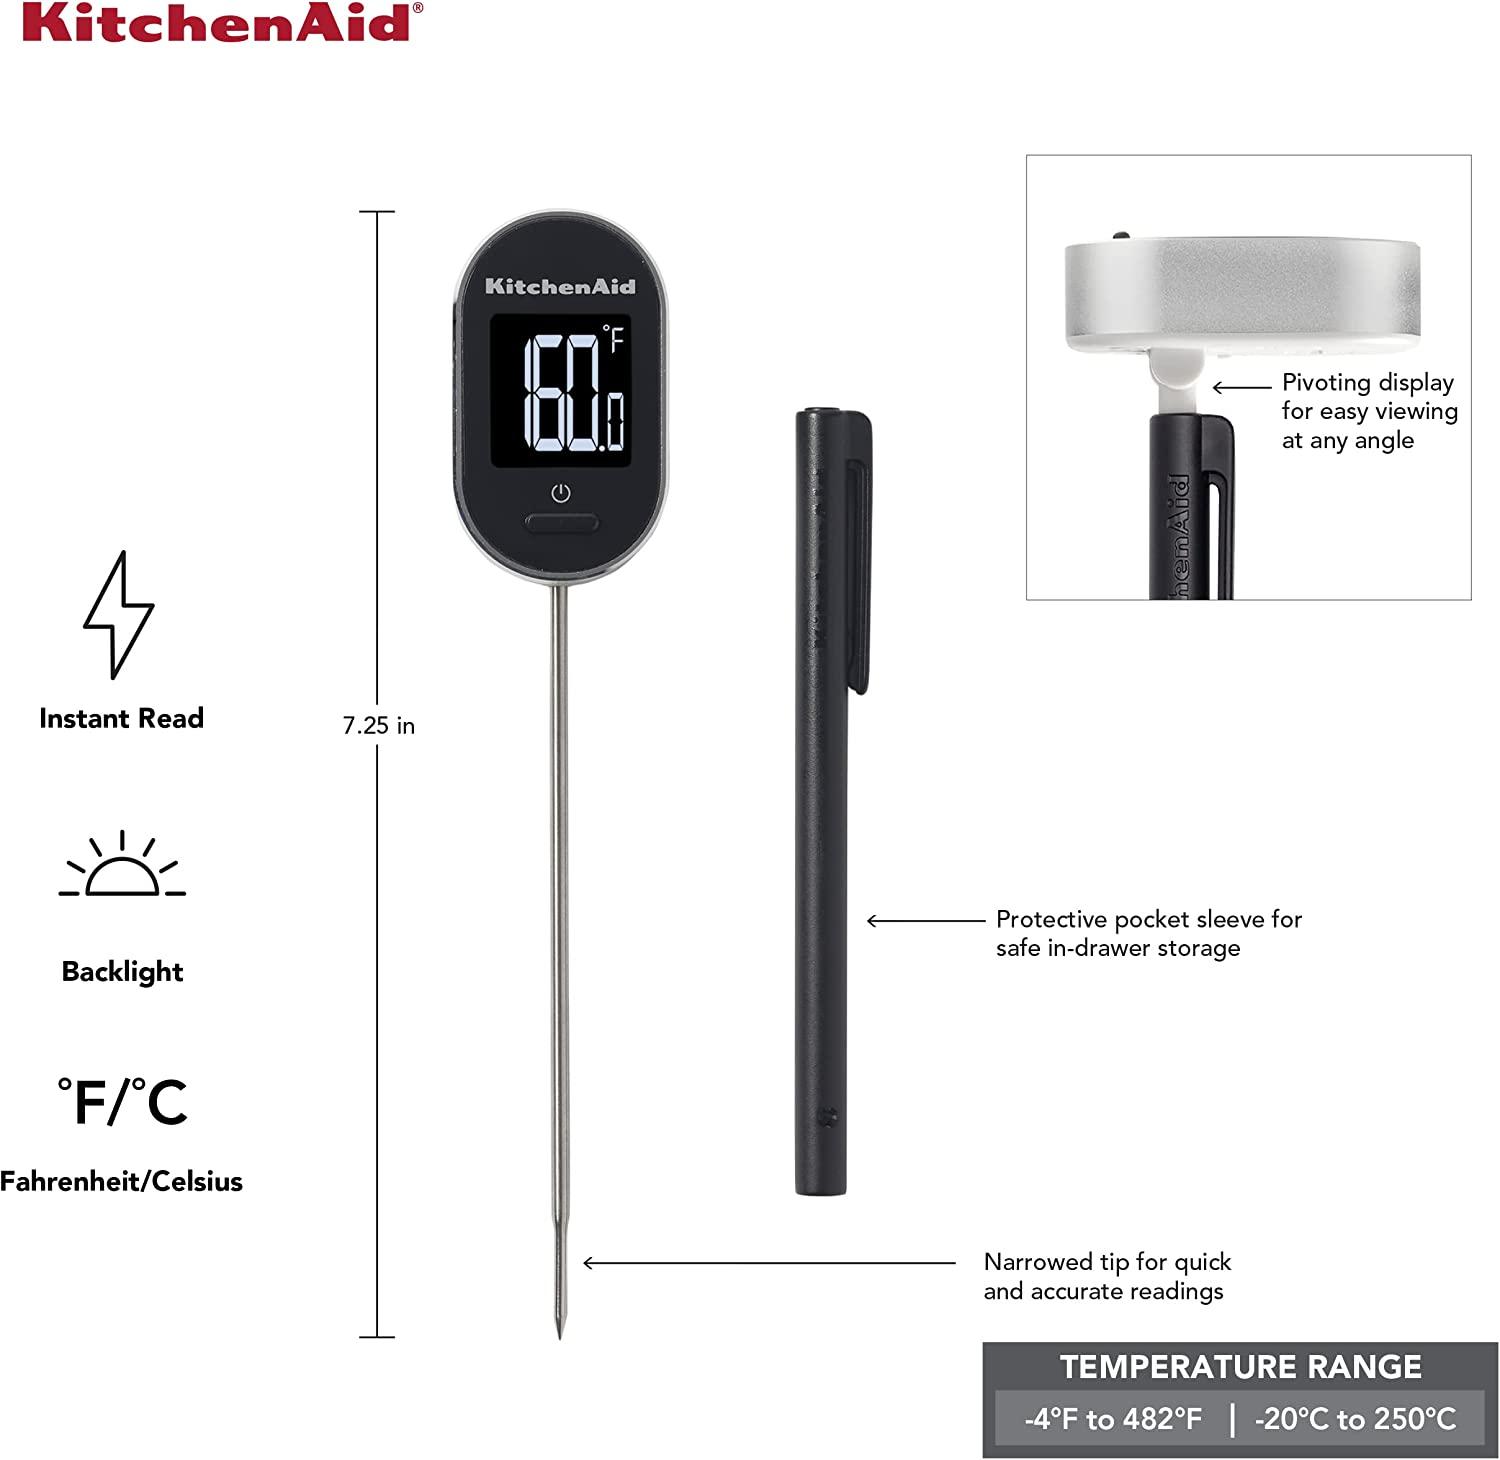 KitchenAid Leave-in Meat Thermometer, TEMPERATURE RANGE: 120F to 200F New!